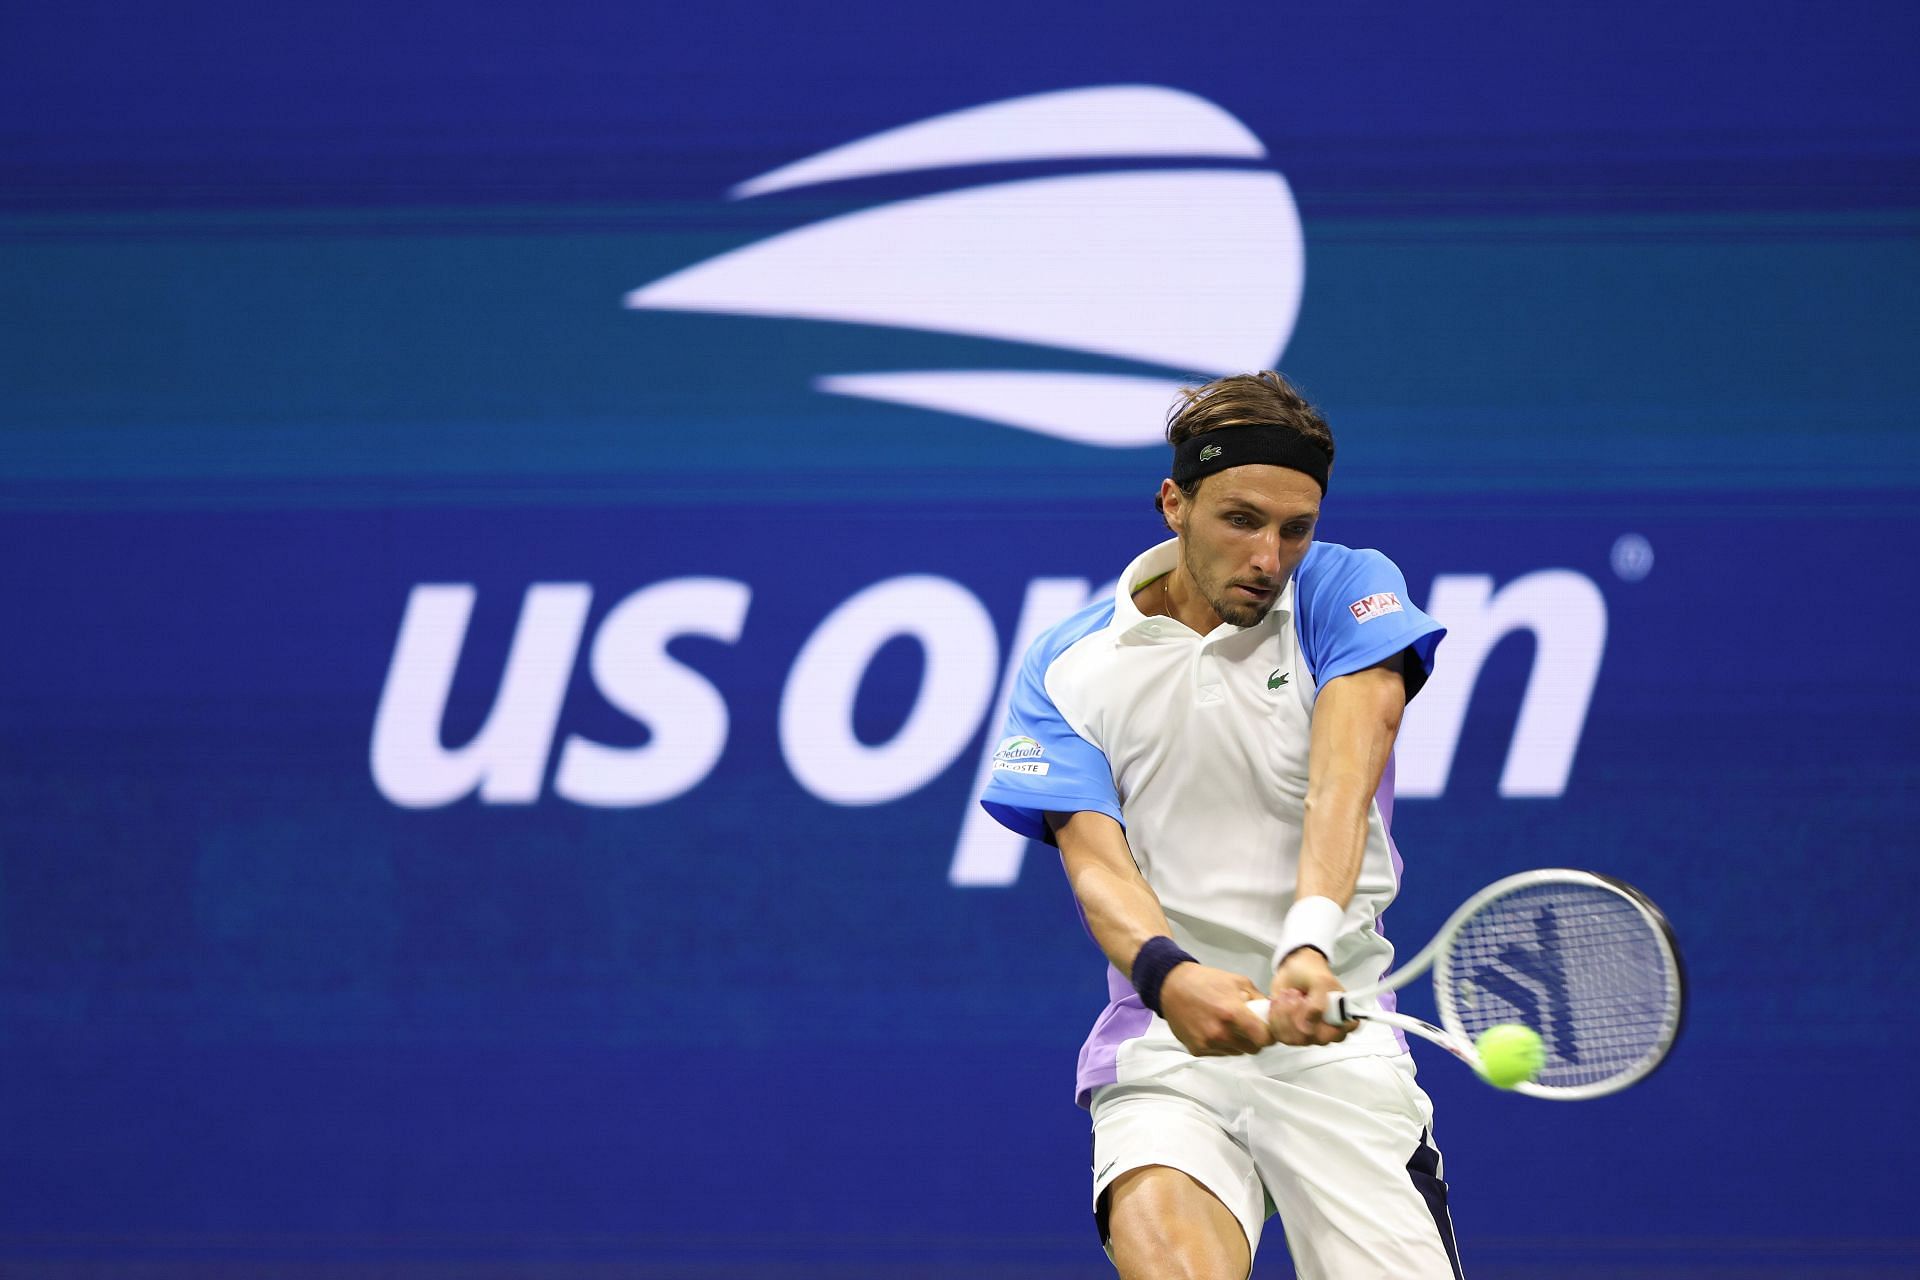 Arthur Rinderknech competing at the US Open